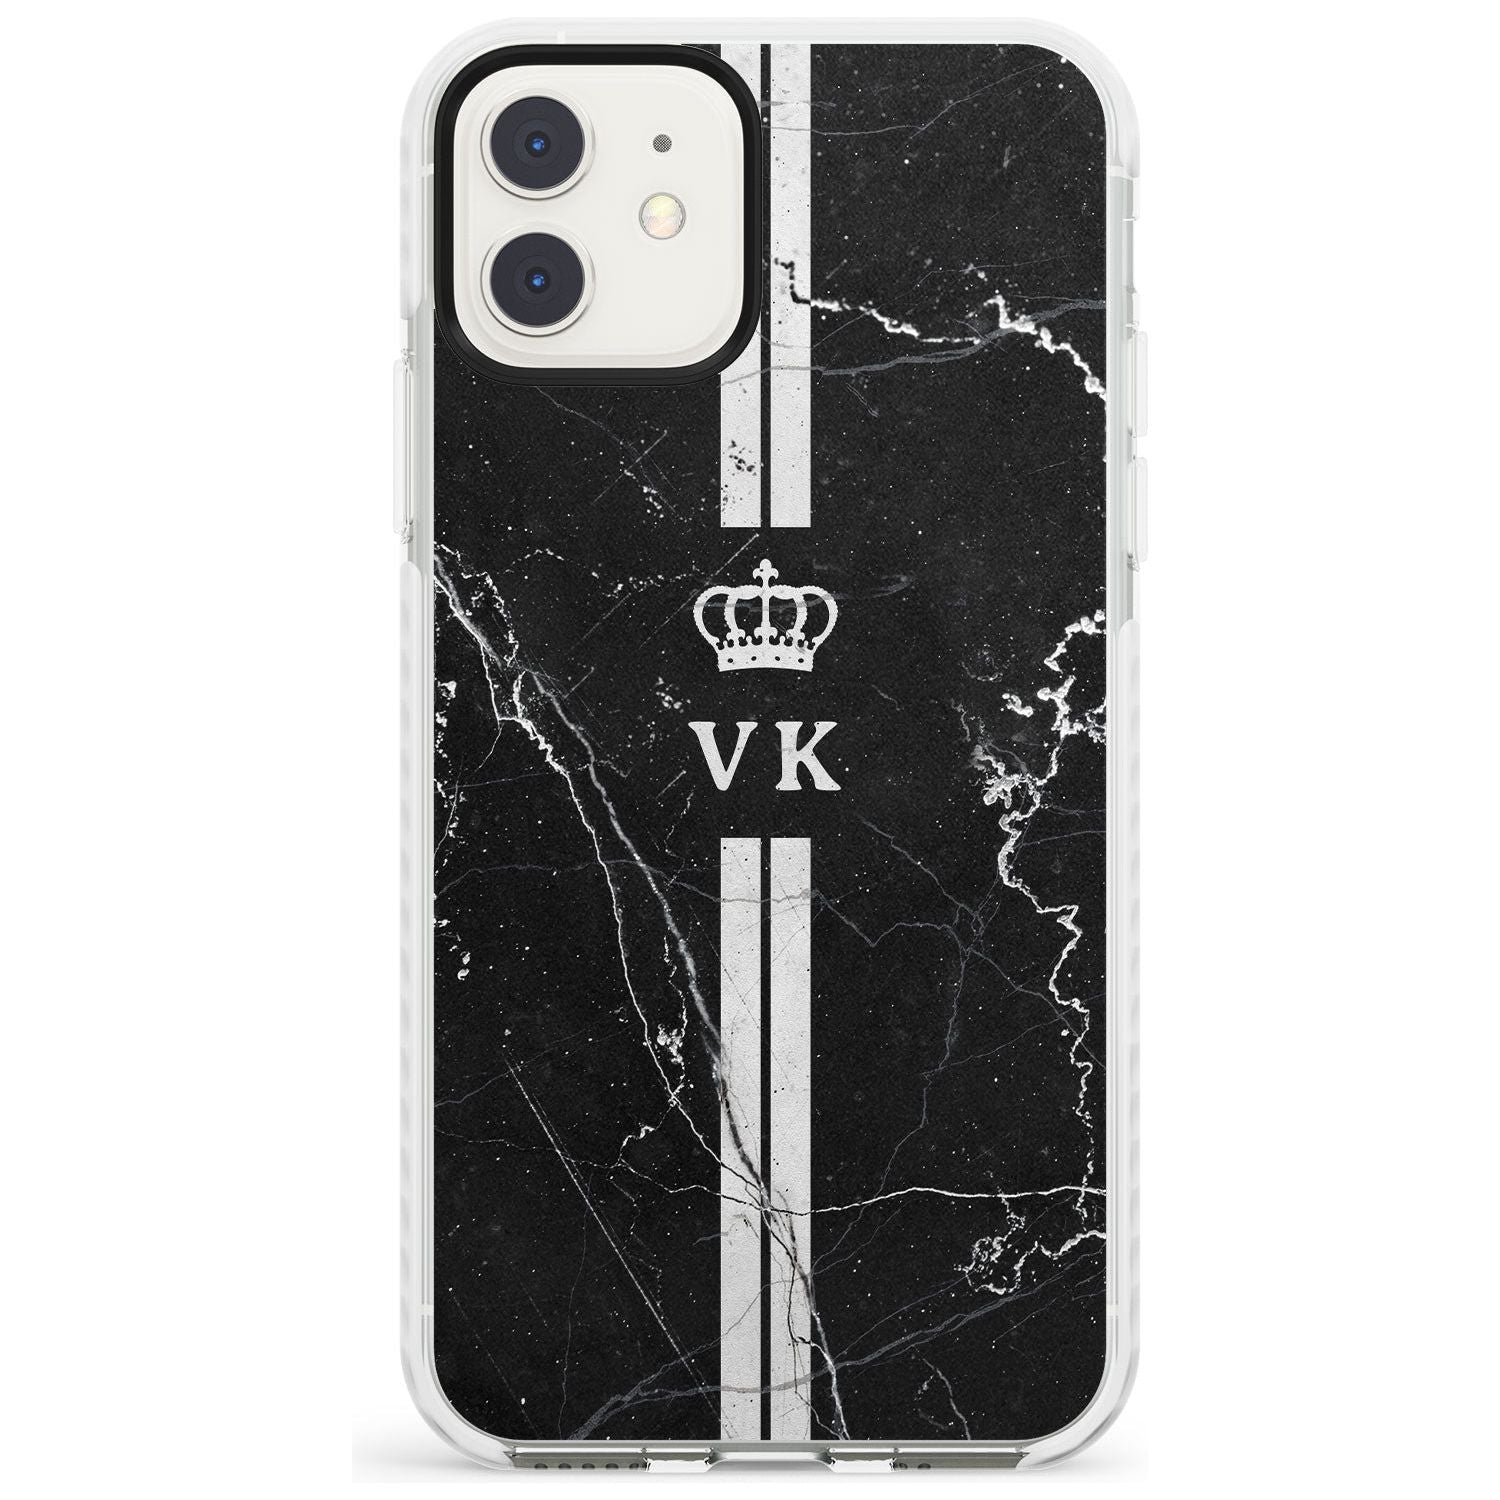 Stripes + Initials with Crown on Black Marble Impact Phone Case for iPhone 11